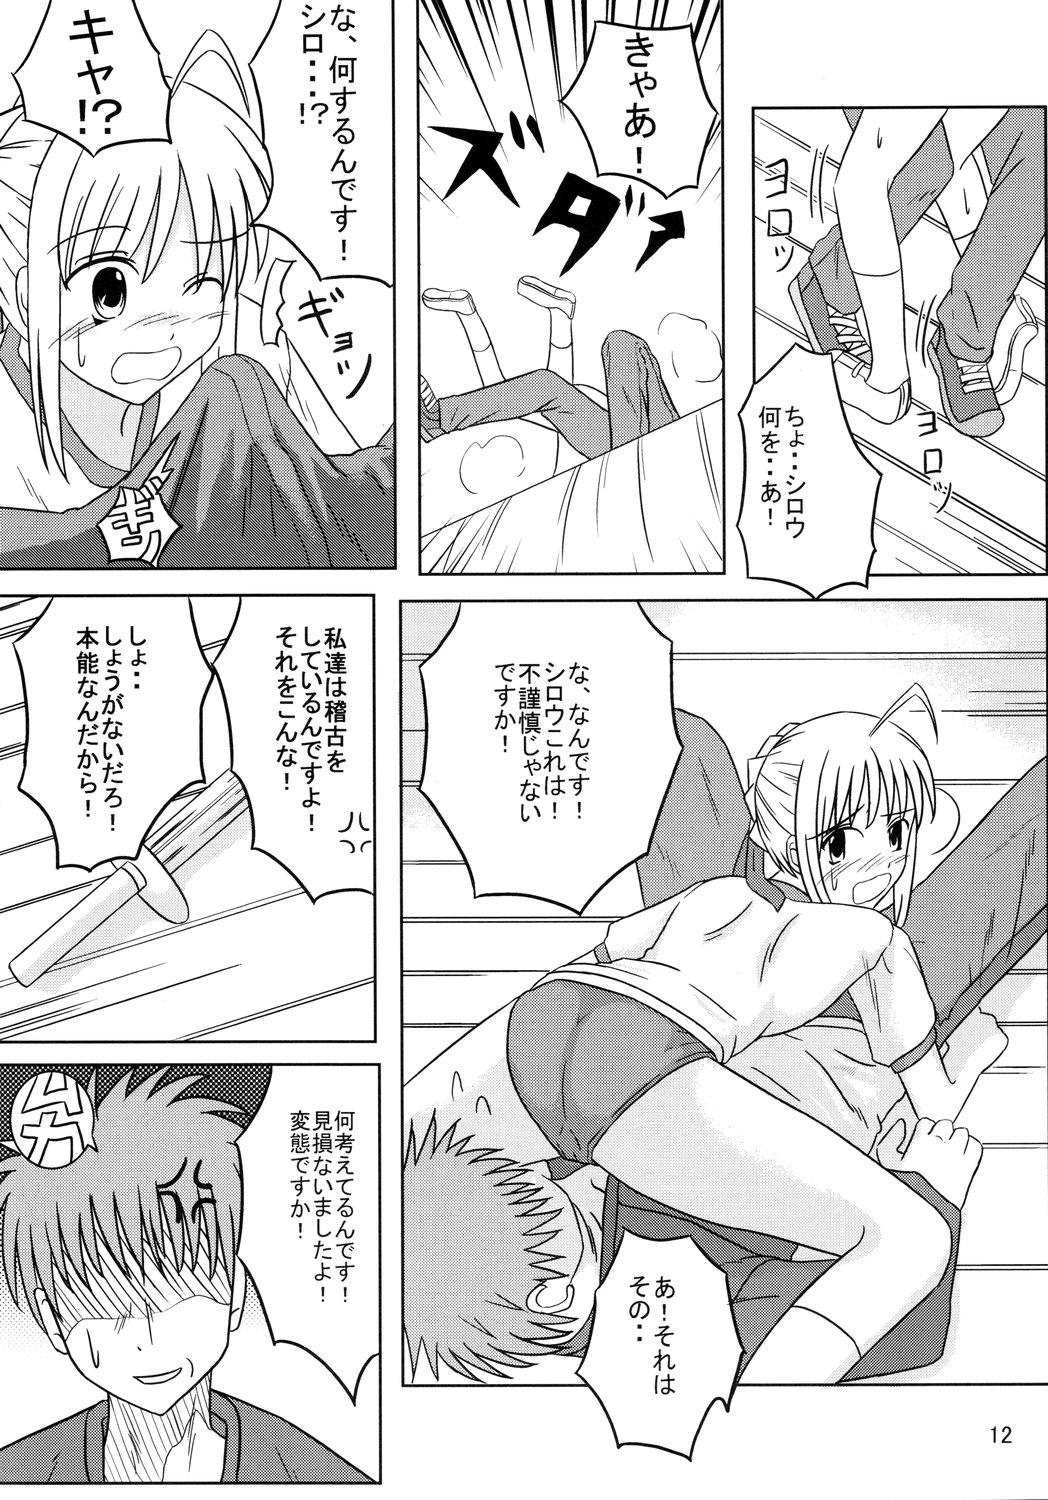 Femdom Porn Saber Of Sanity - Fate stay night Licking Pussy - Page 11